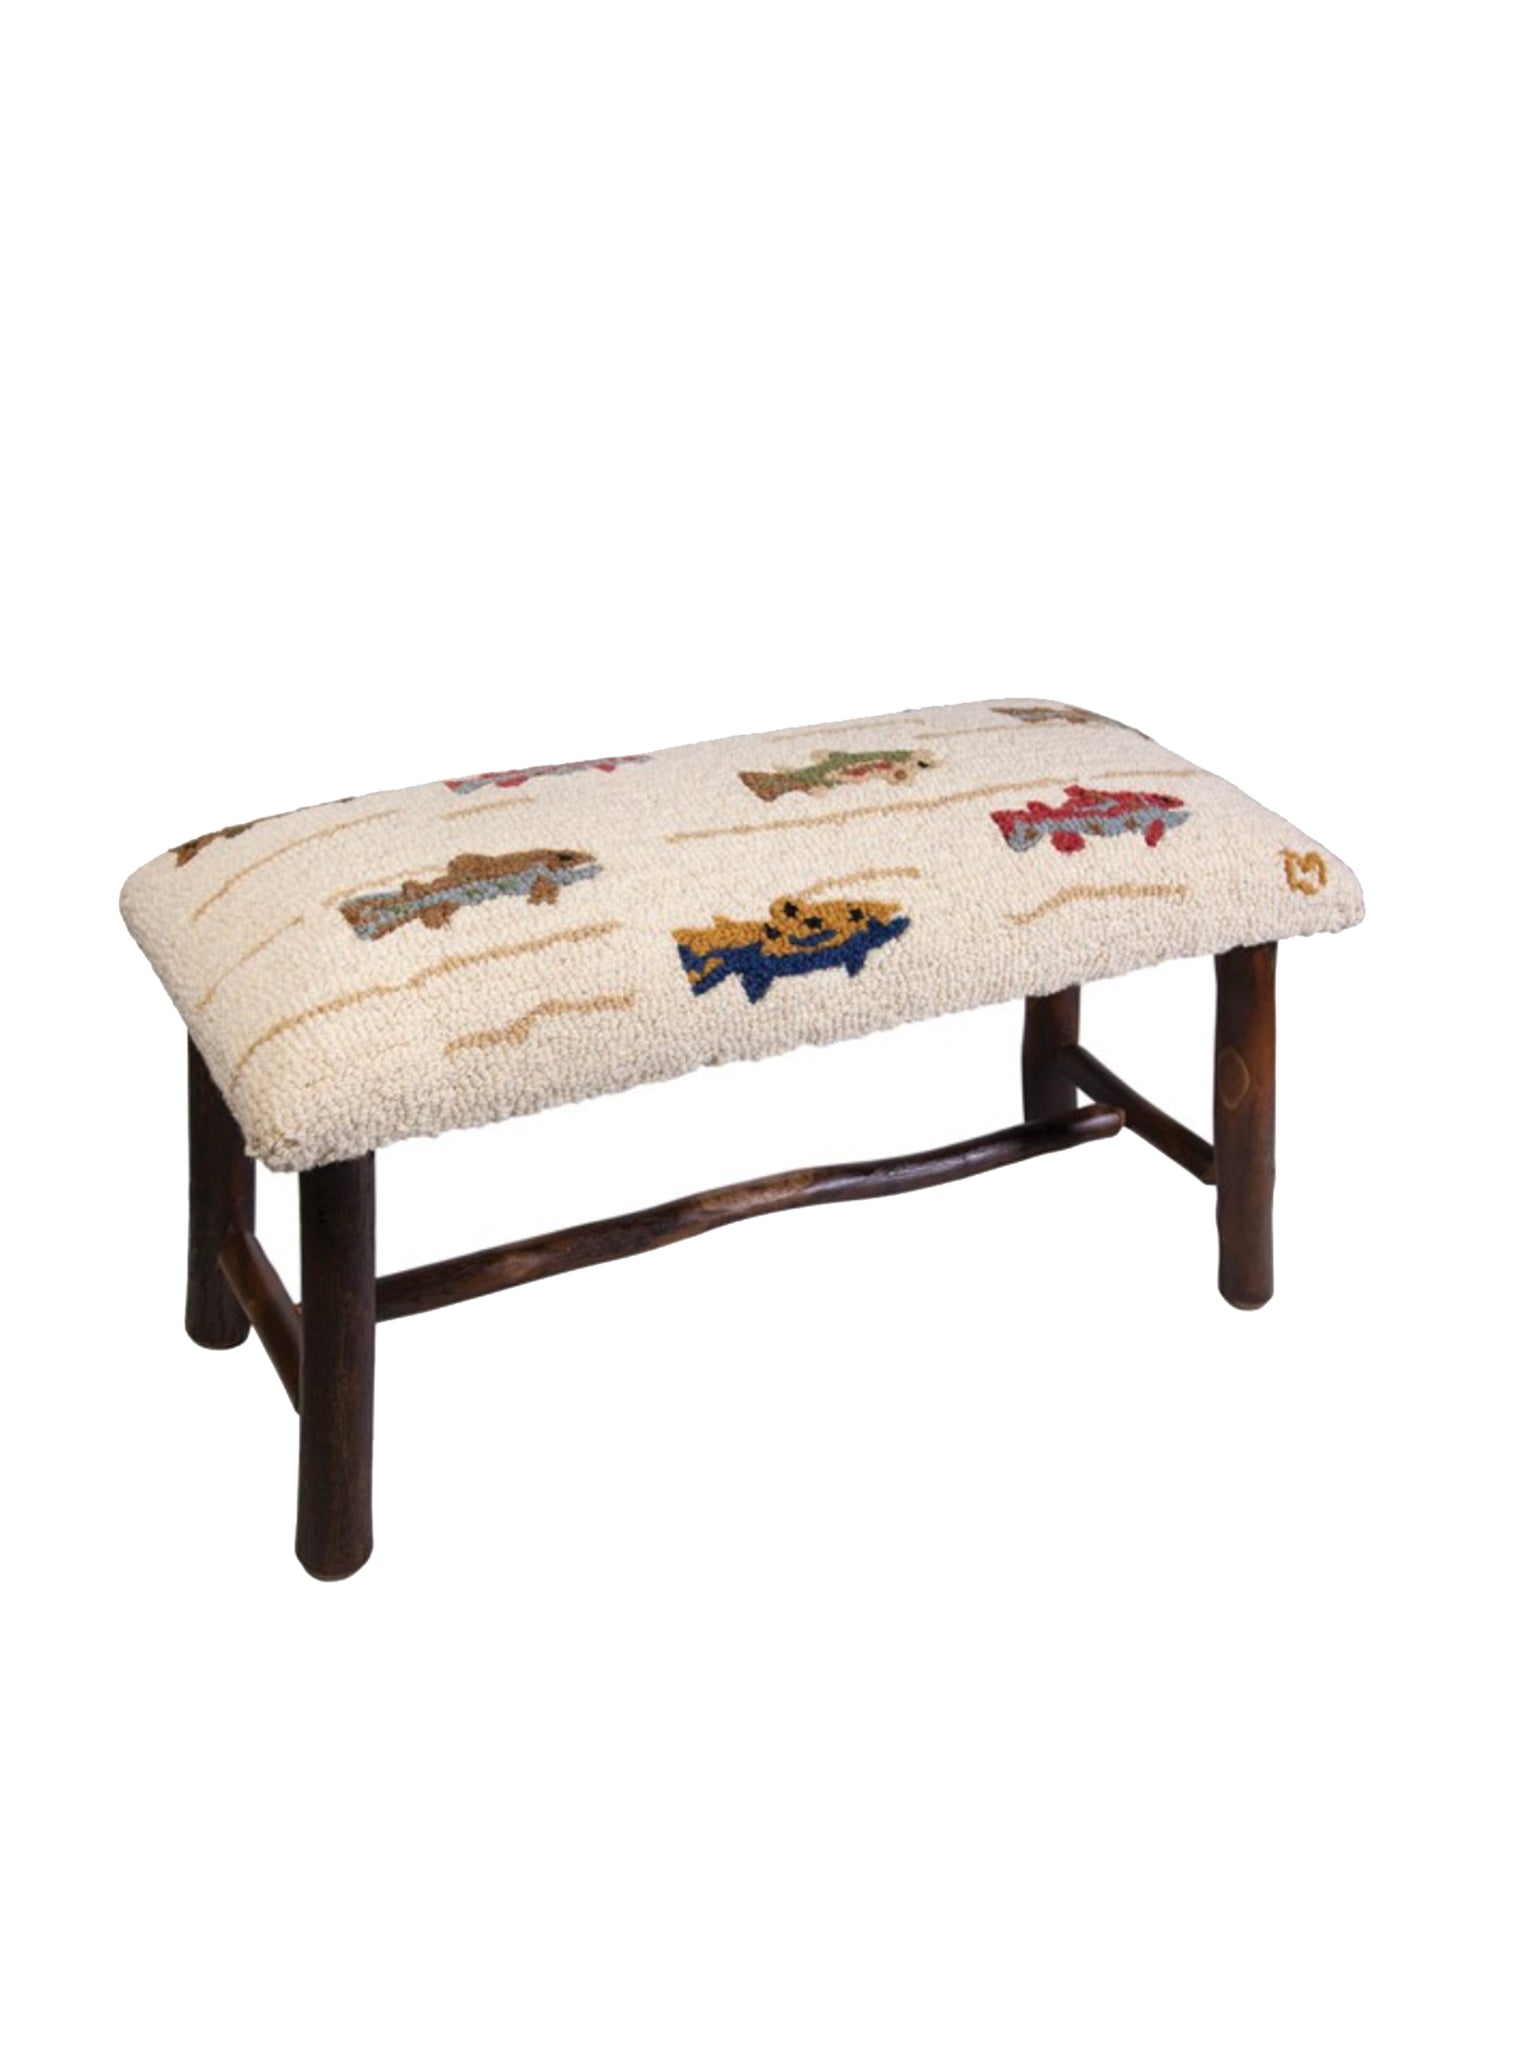 Trout Wool Topped Bench Weston Table